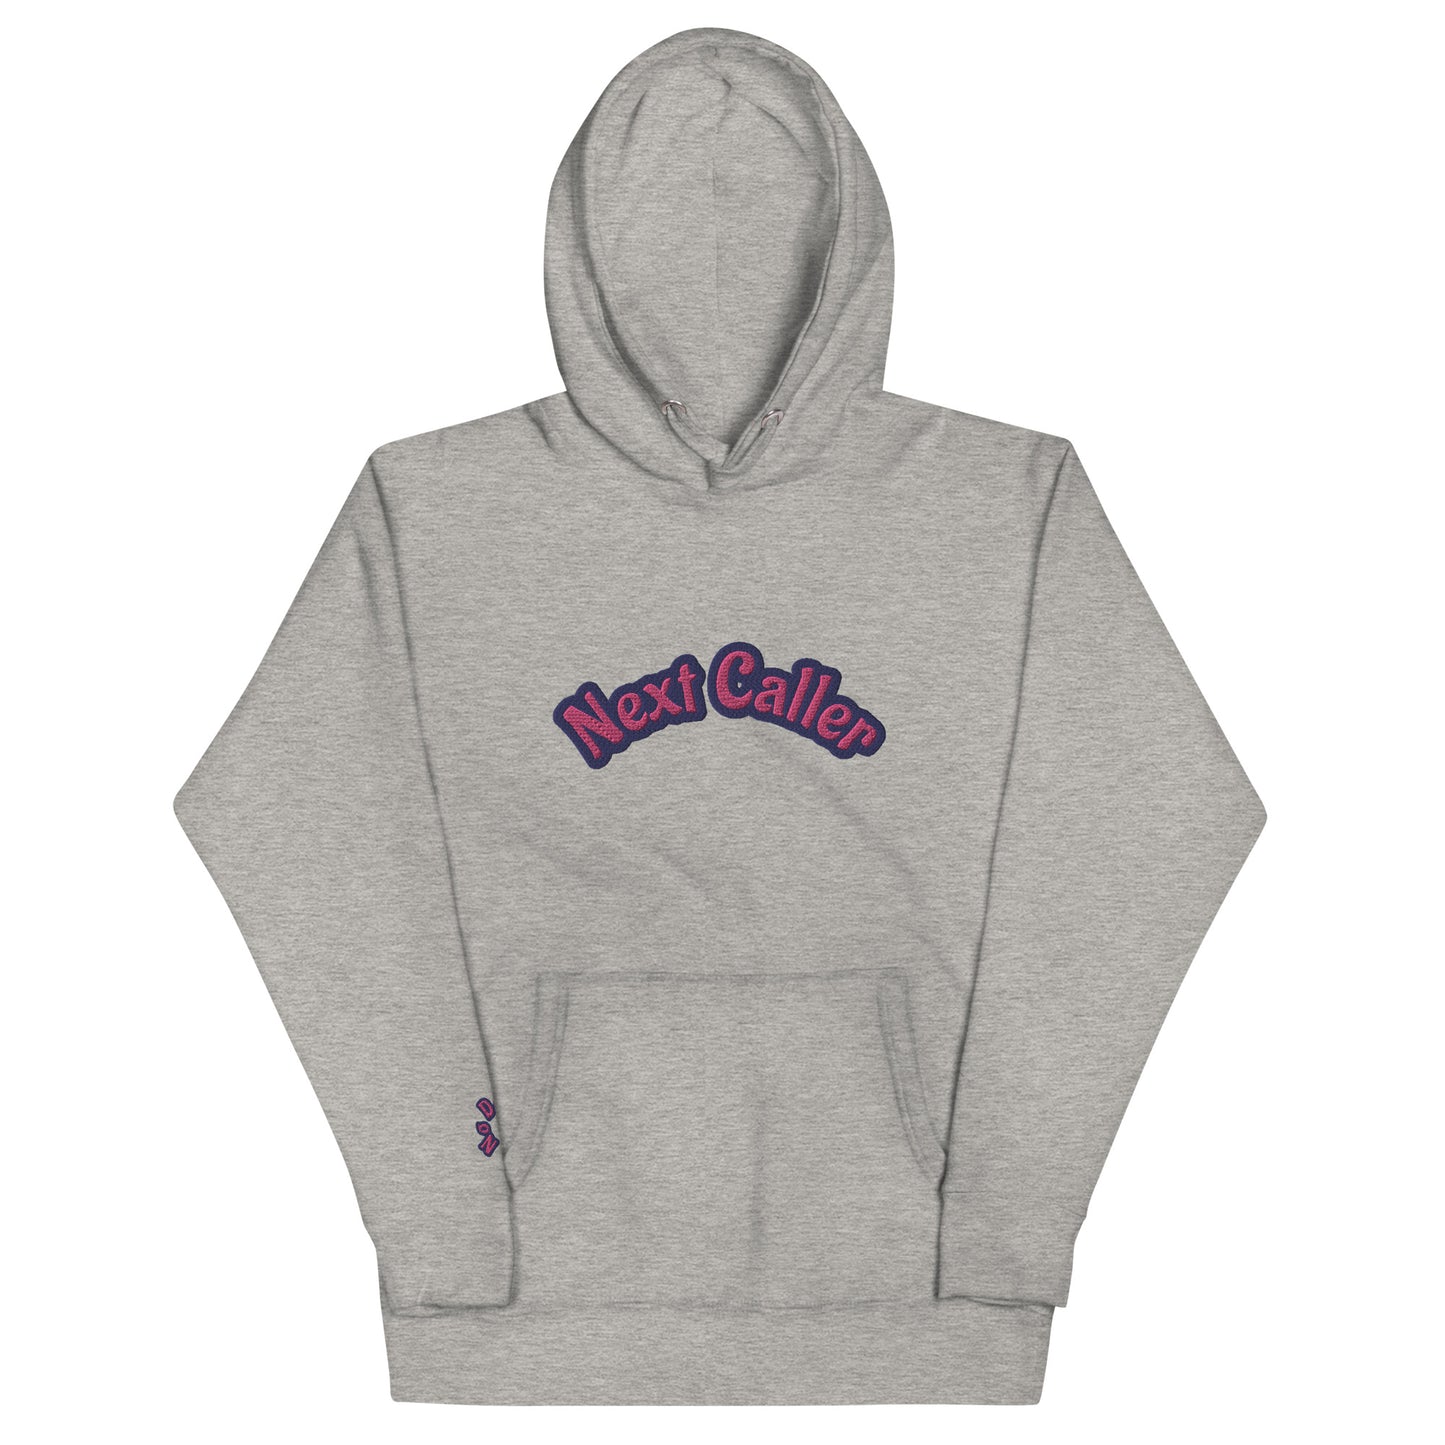 Embroidery Next Caller Cotton 'No Dusties' Hoodie